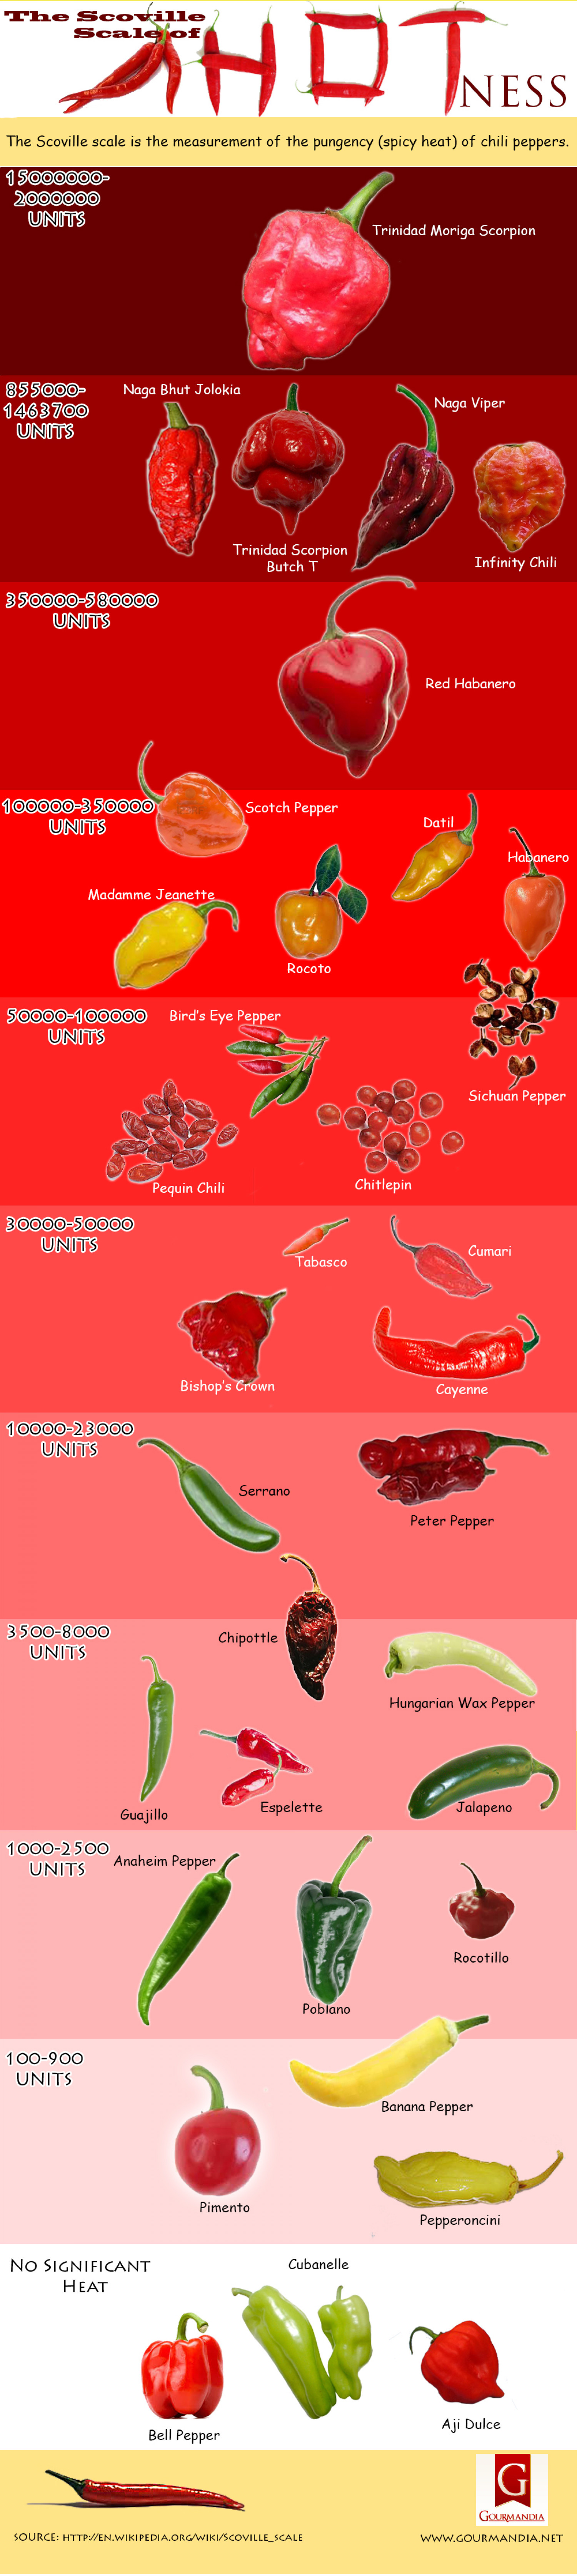 The Scoville Scale of Hotness Infographic